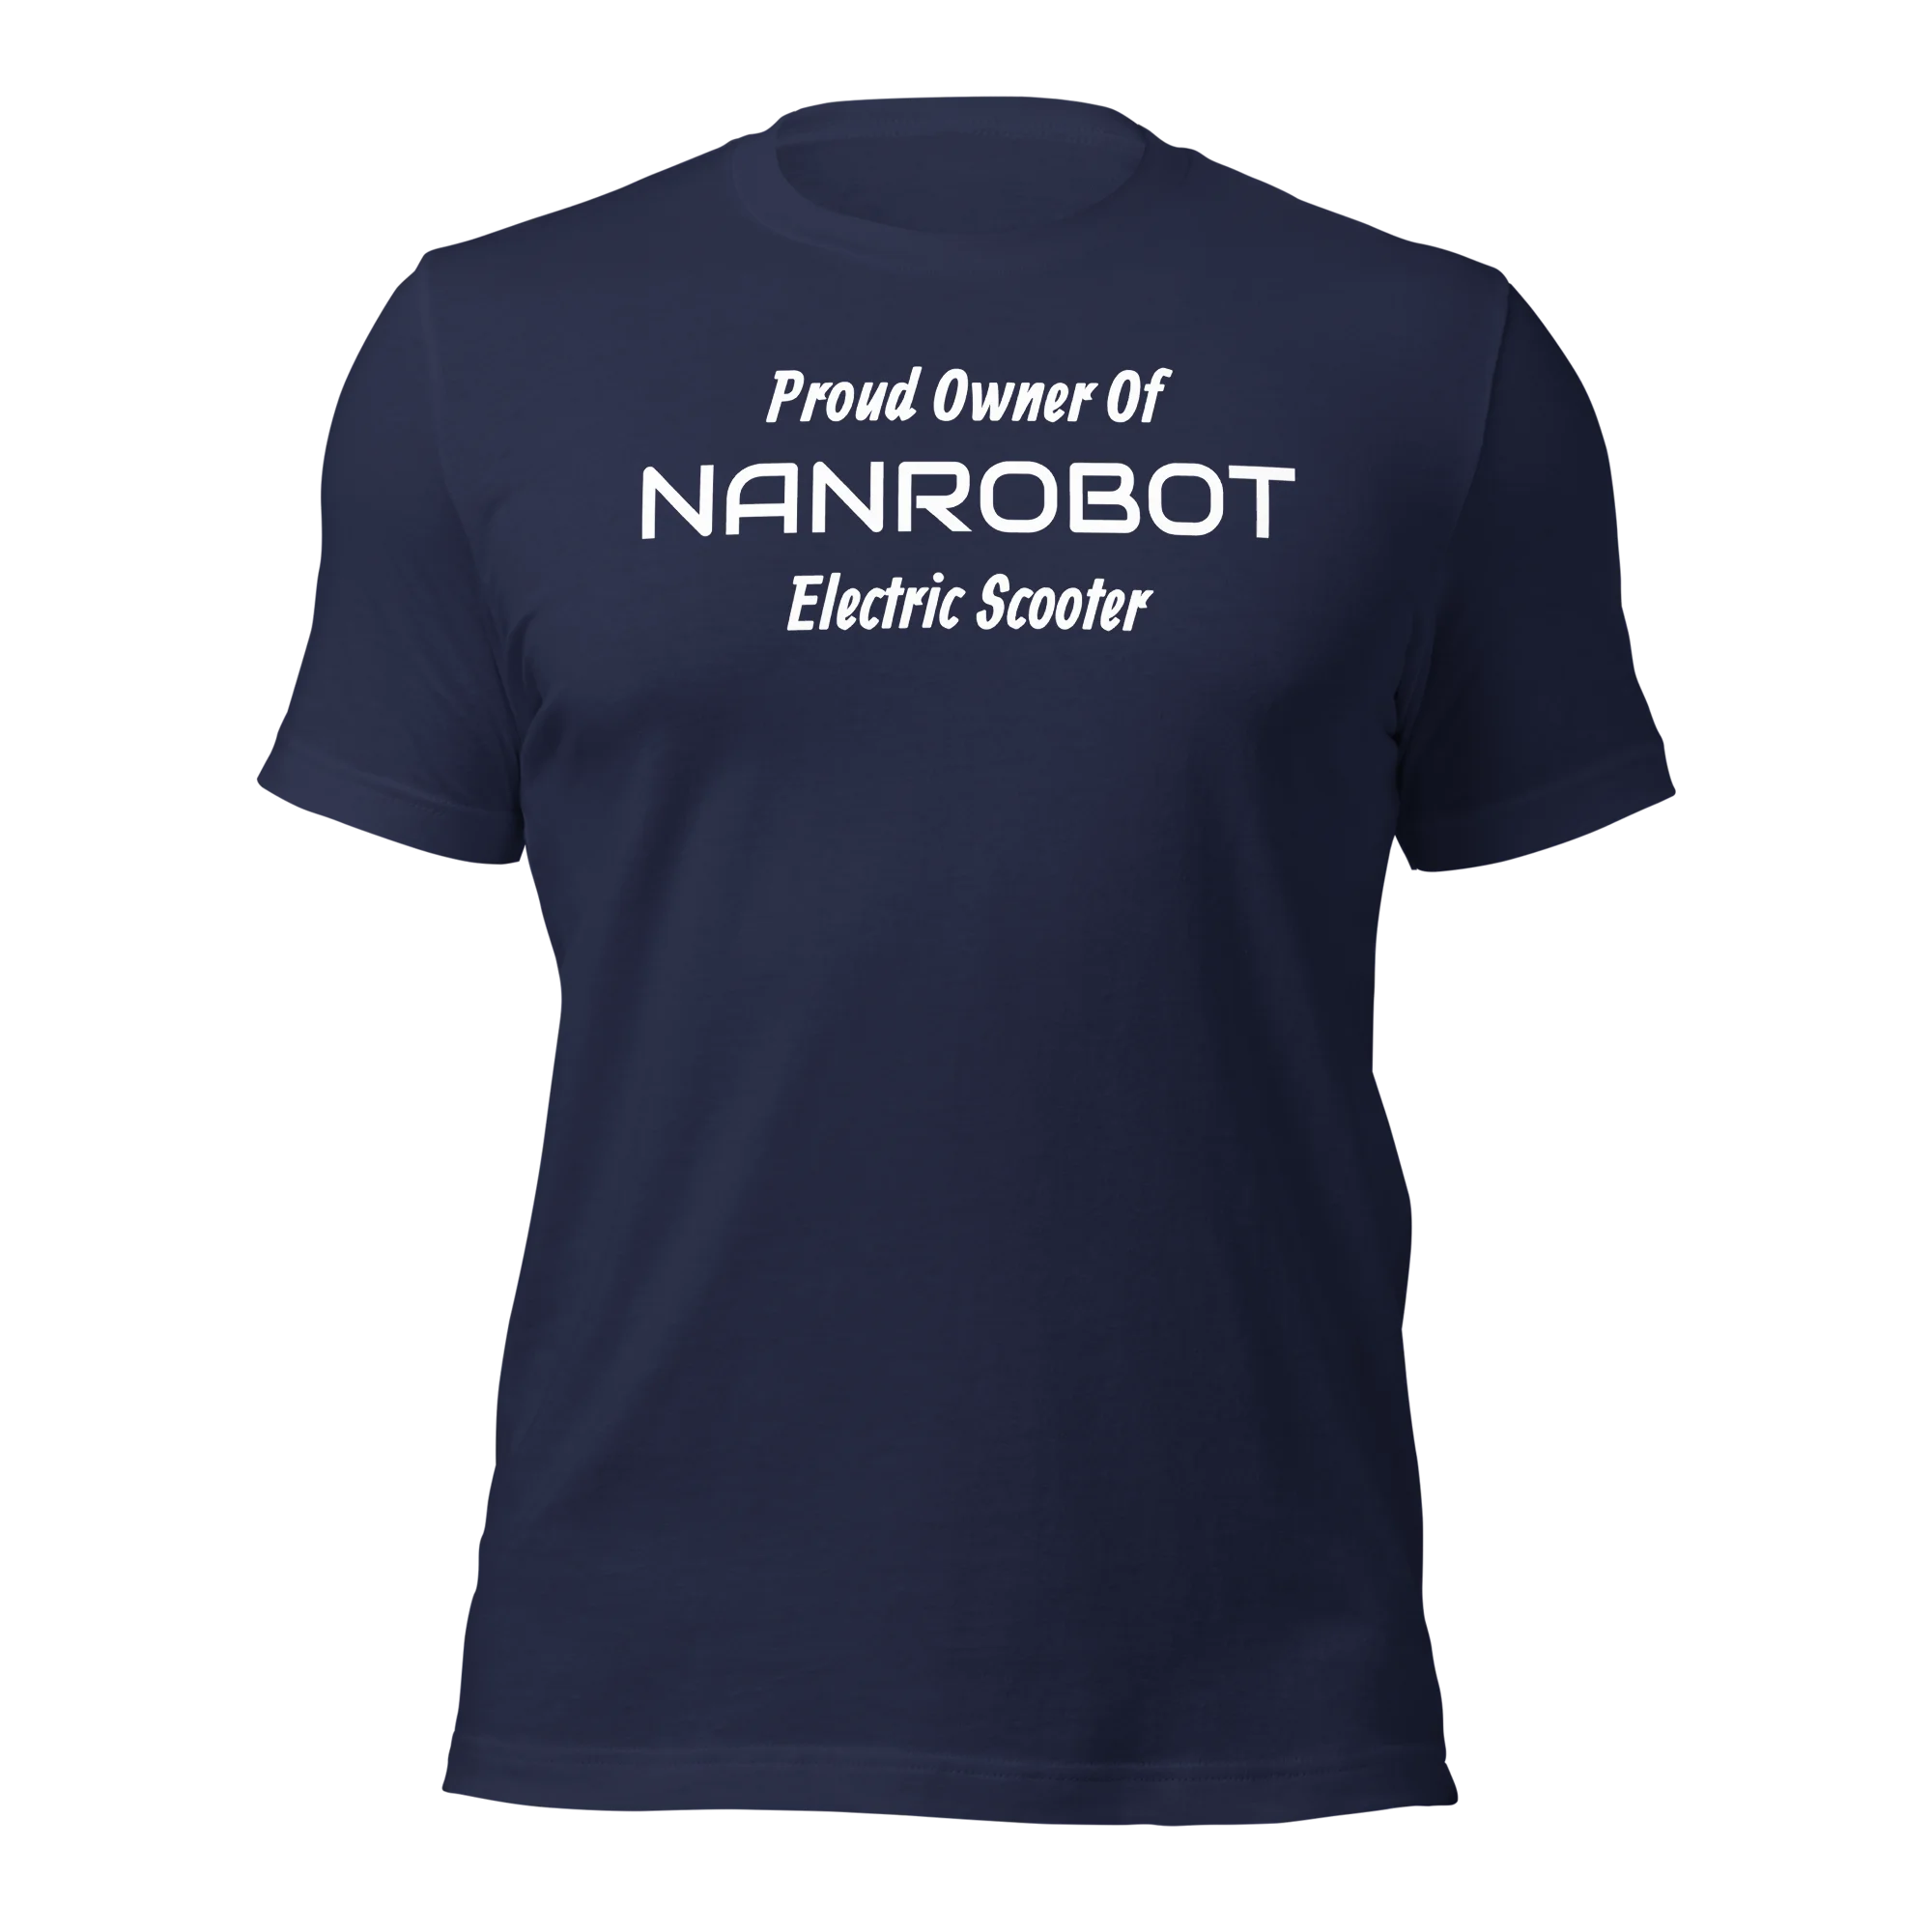 Funny T-Shirt: Proud Owner Of NANROBOT E-Scooter (Navy Blue)